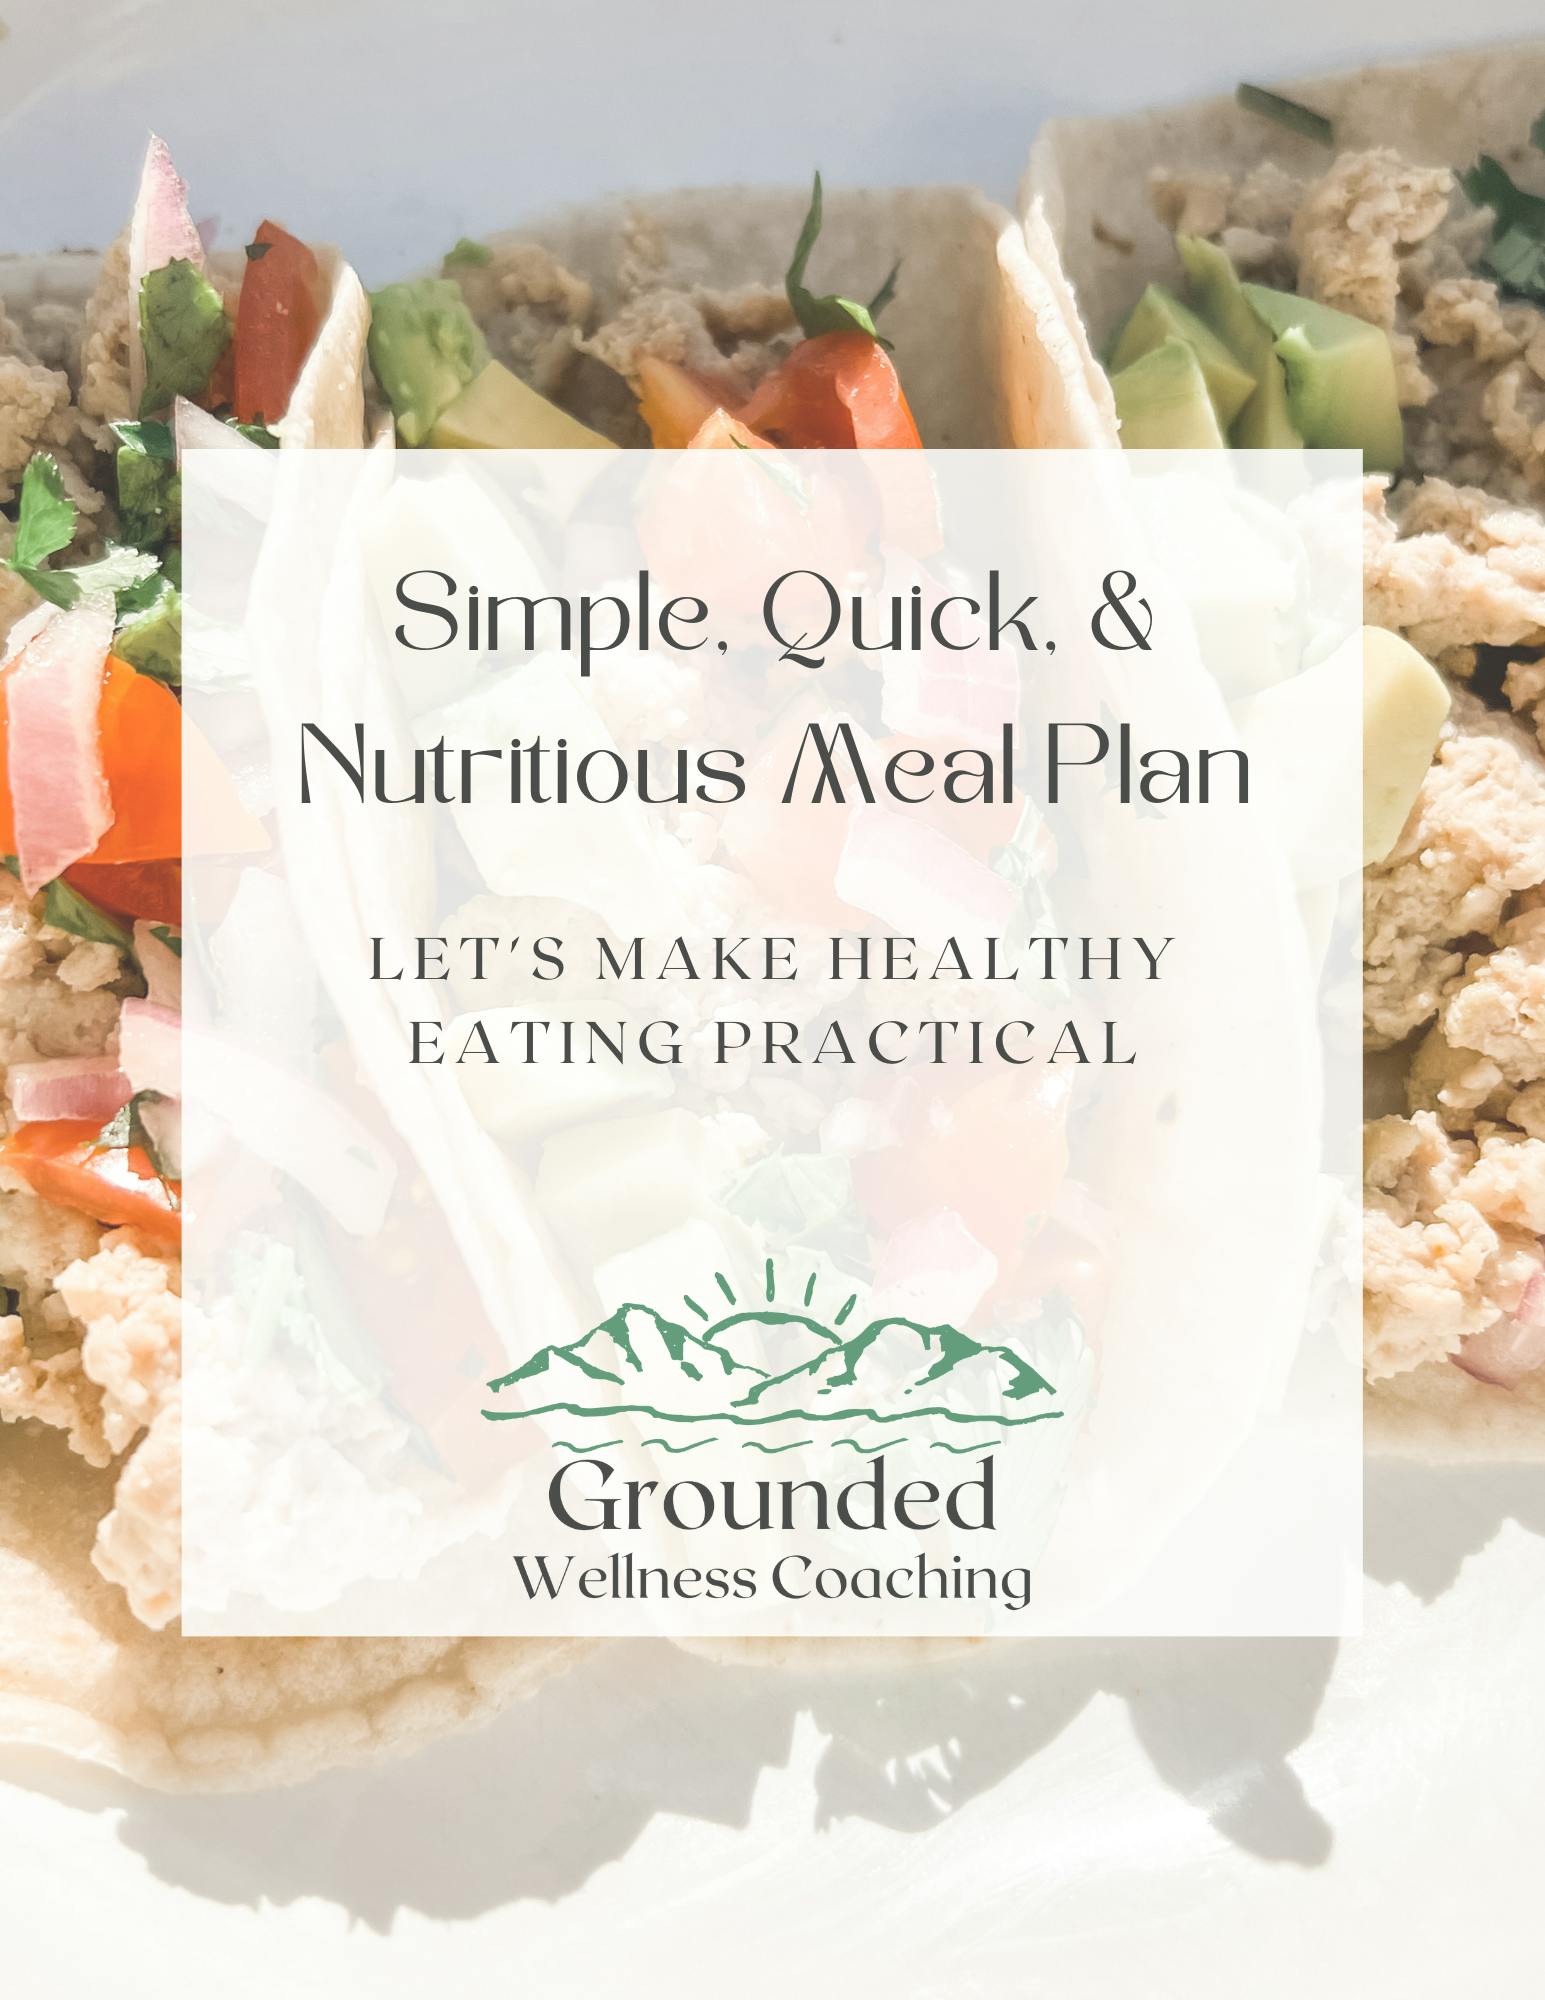 Simple, Quick & Nutritious Meal Plan